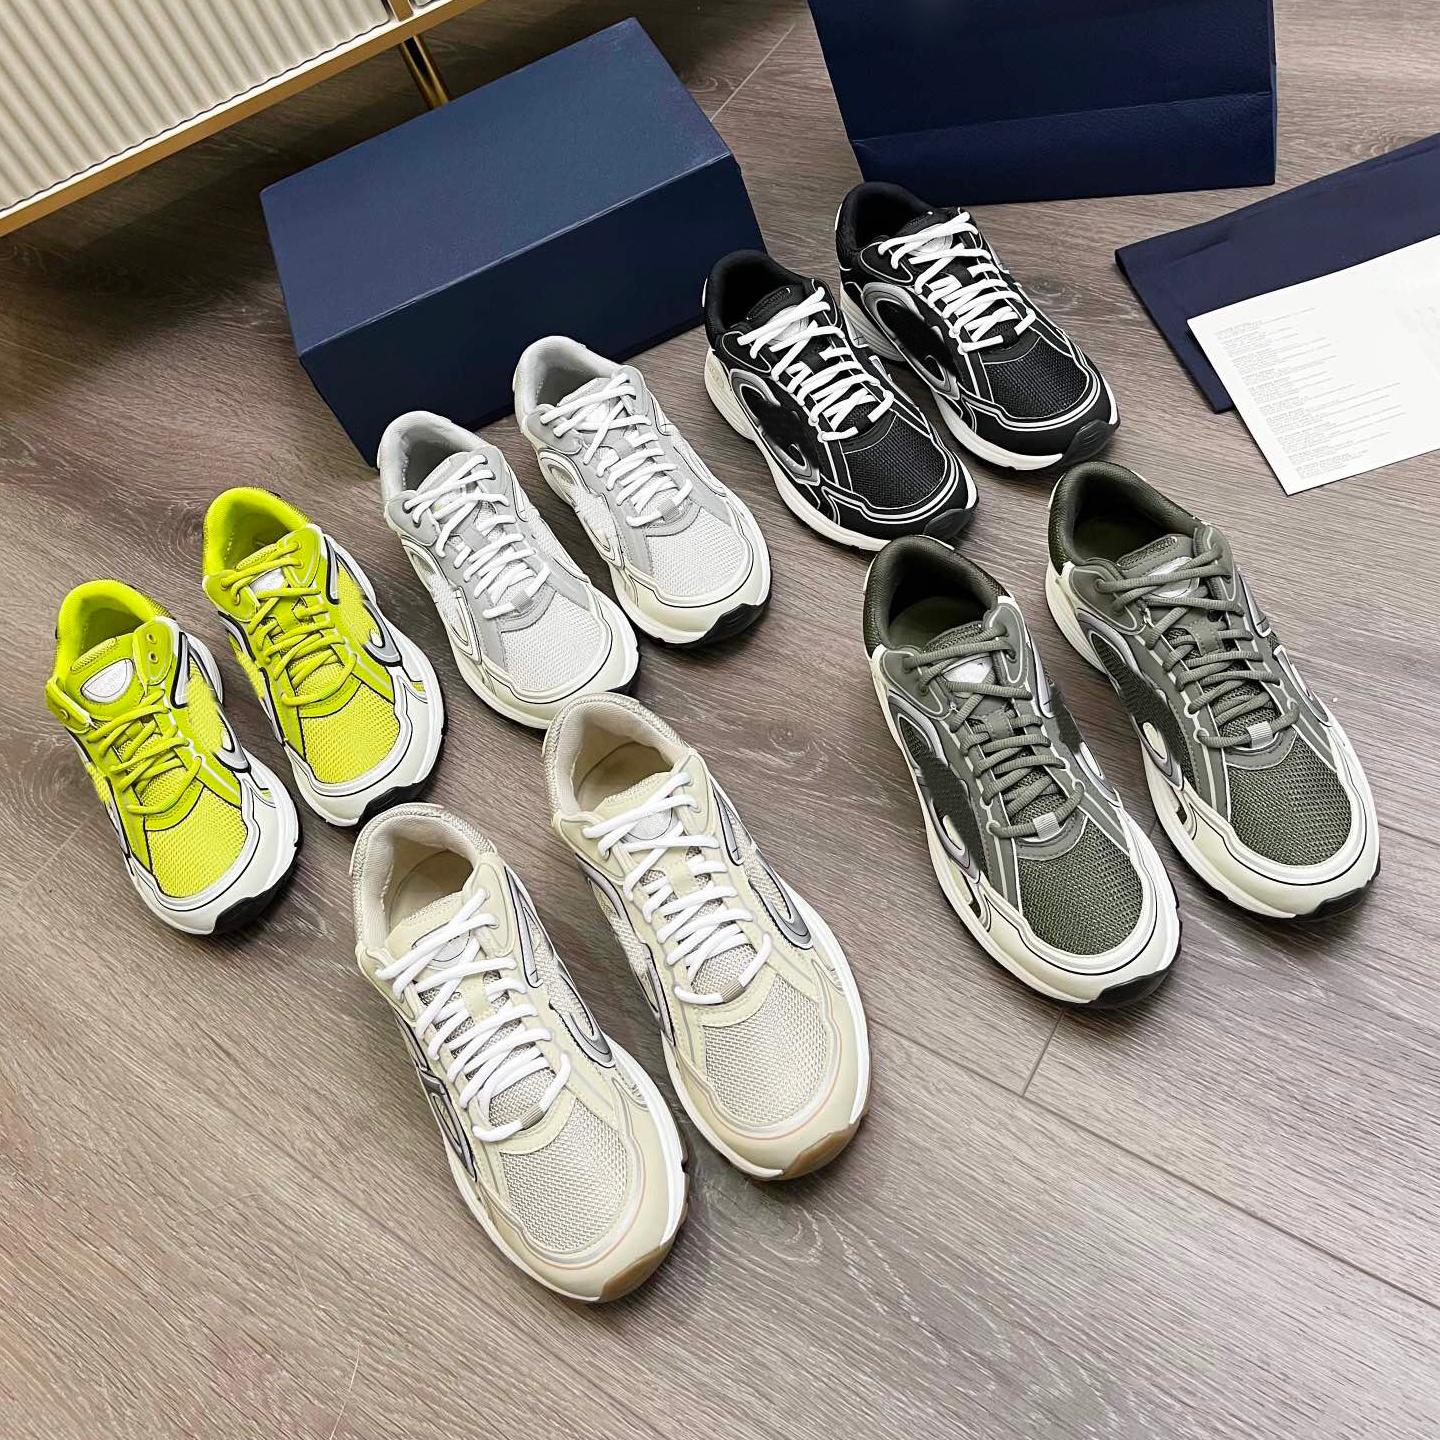 

Designer Sneakers B30 Men Women Vintage Chunky Casual Shoes Calfskin Mesh Grey Technical Oblique Runner Trainers Outdoor Shoe, Box